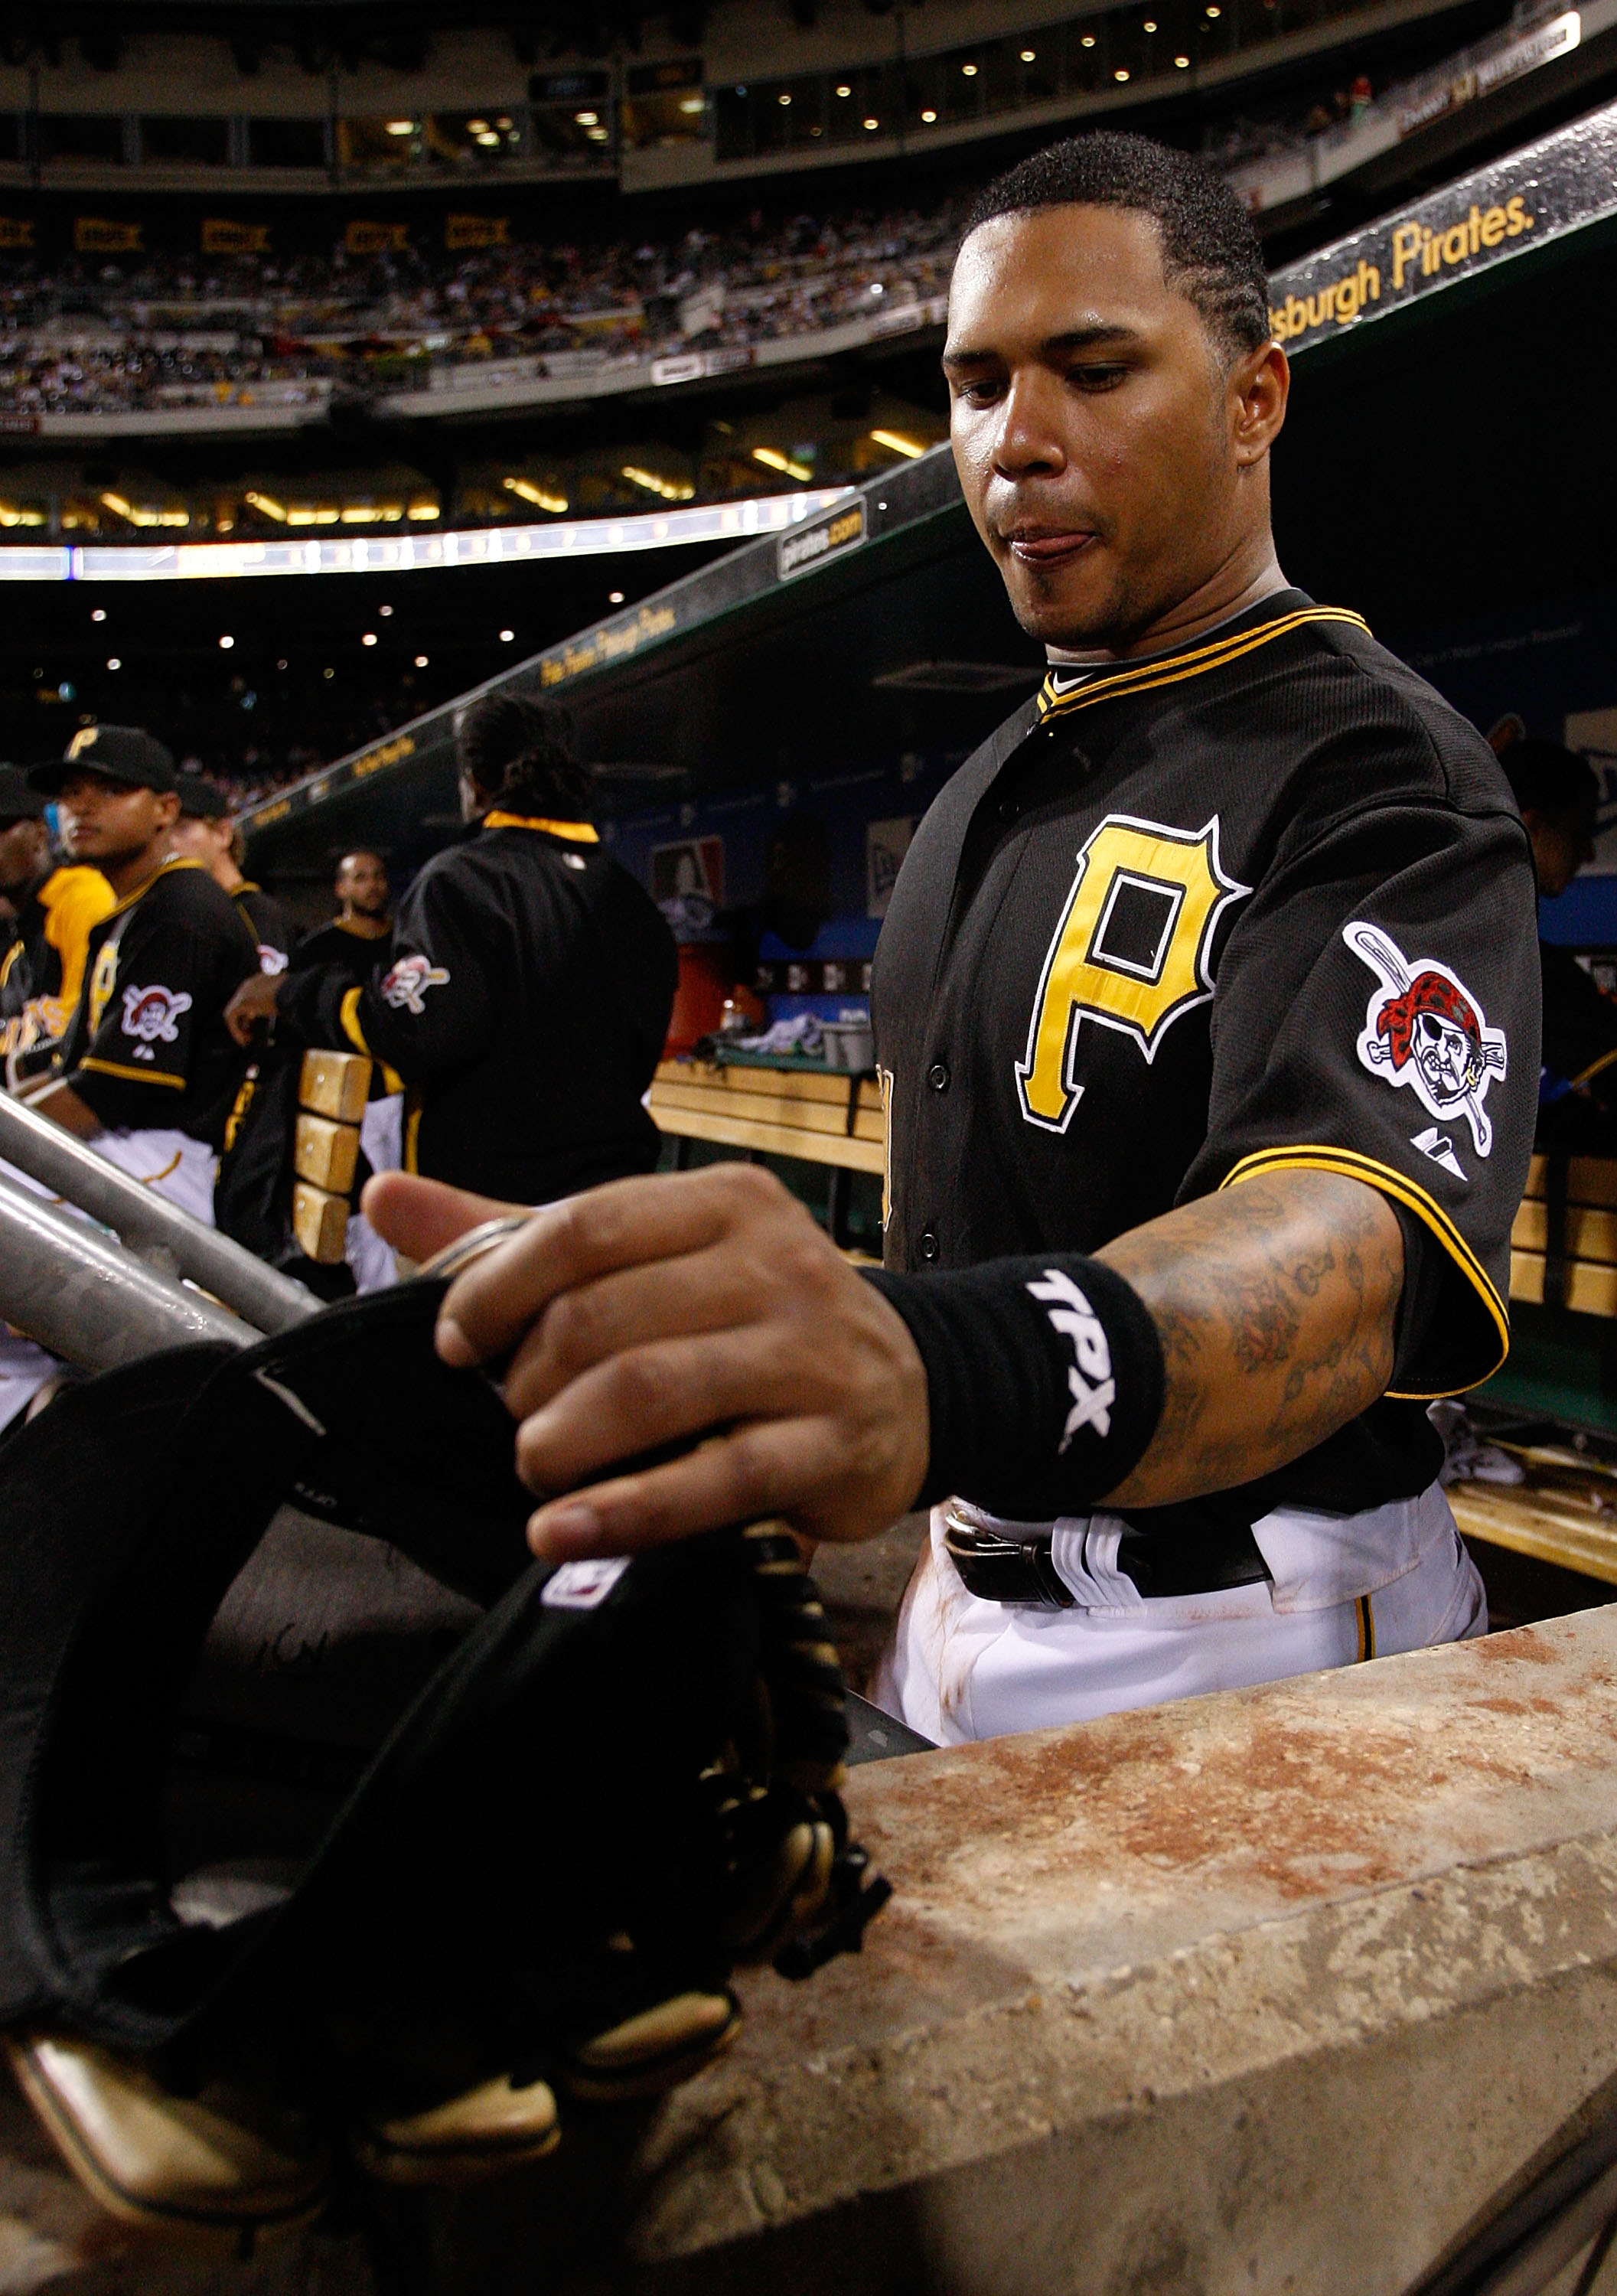 PITTSBURGH - SEPTEMBER 21:  Jose Tabata #31 of the Pittsburgh Pirates grabs his hat and glove before heading out onto the field during the game against the St. Louis Cardinals on September 21, 2010 at PNC Park in Pittsburgh, Pennsylvania.  (Photo by Jared